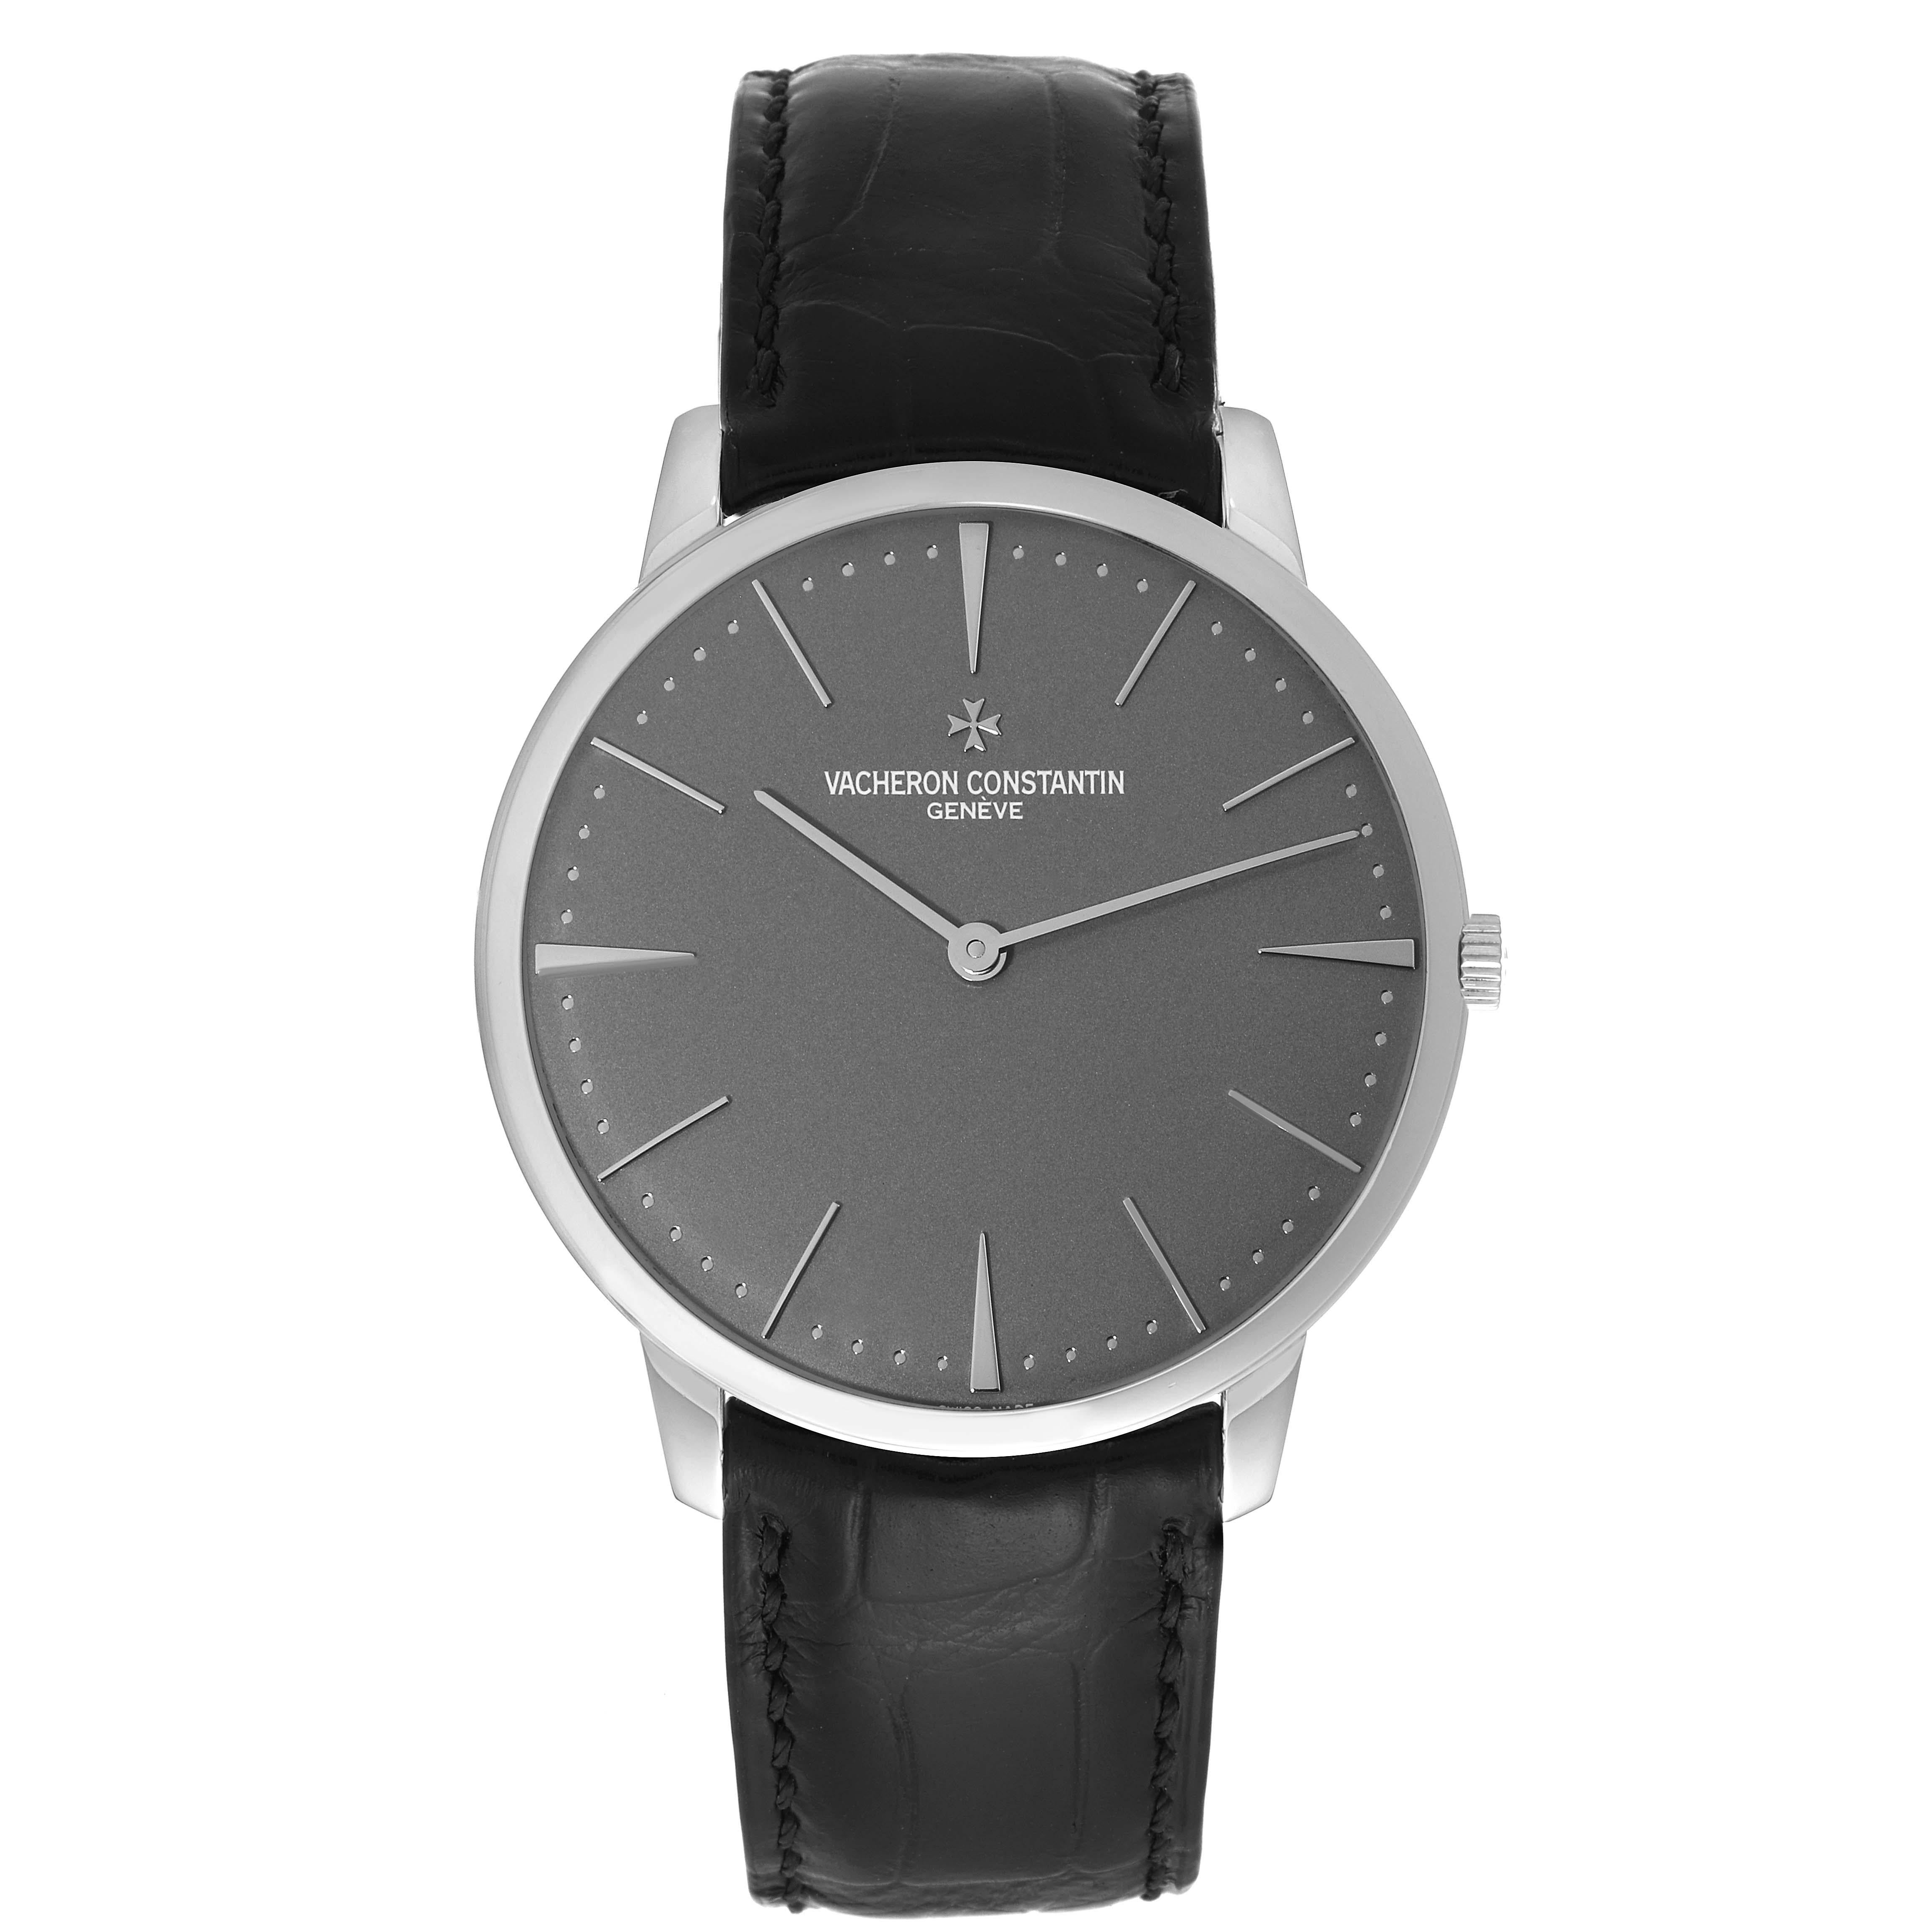 Vacheron Constantin Patrimony Grand Taille Grey Dial Platinum Mens Watch 81180. Manual winding movement. Platinum case 40 mm in diameter.  Case thickness 6.7 mm. Platinum smooth bezel. Scratch resistant sapphire crystal. Slate grey dial with baton